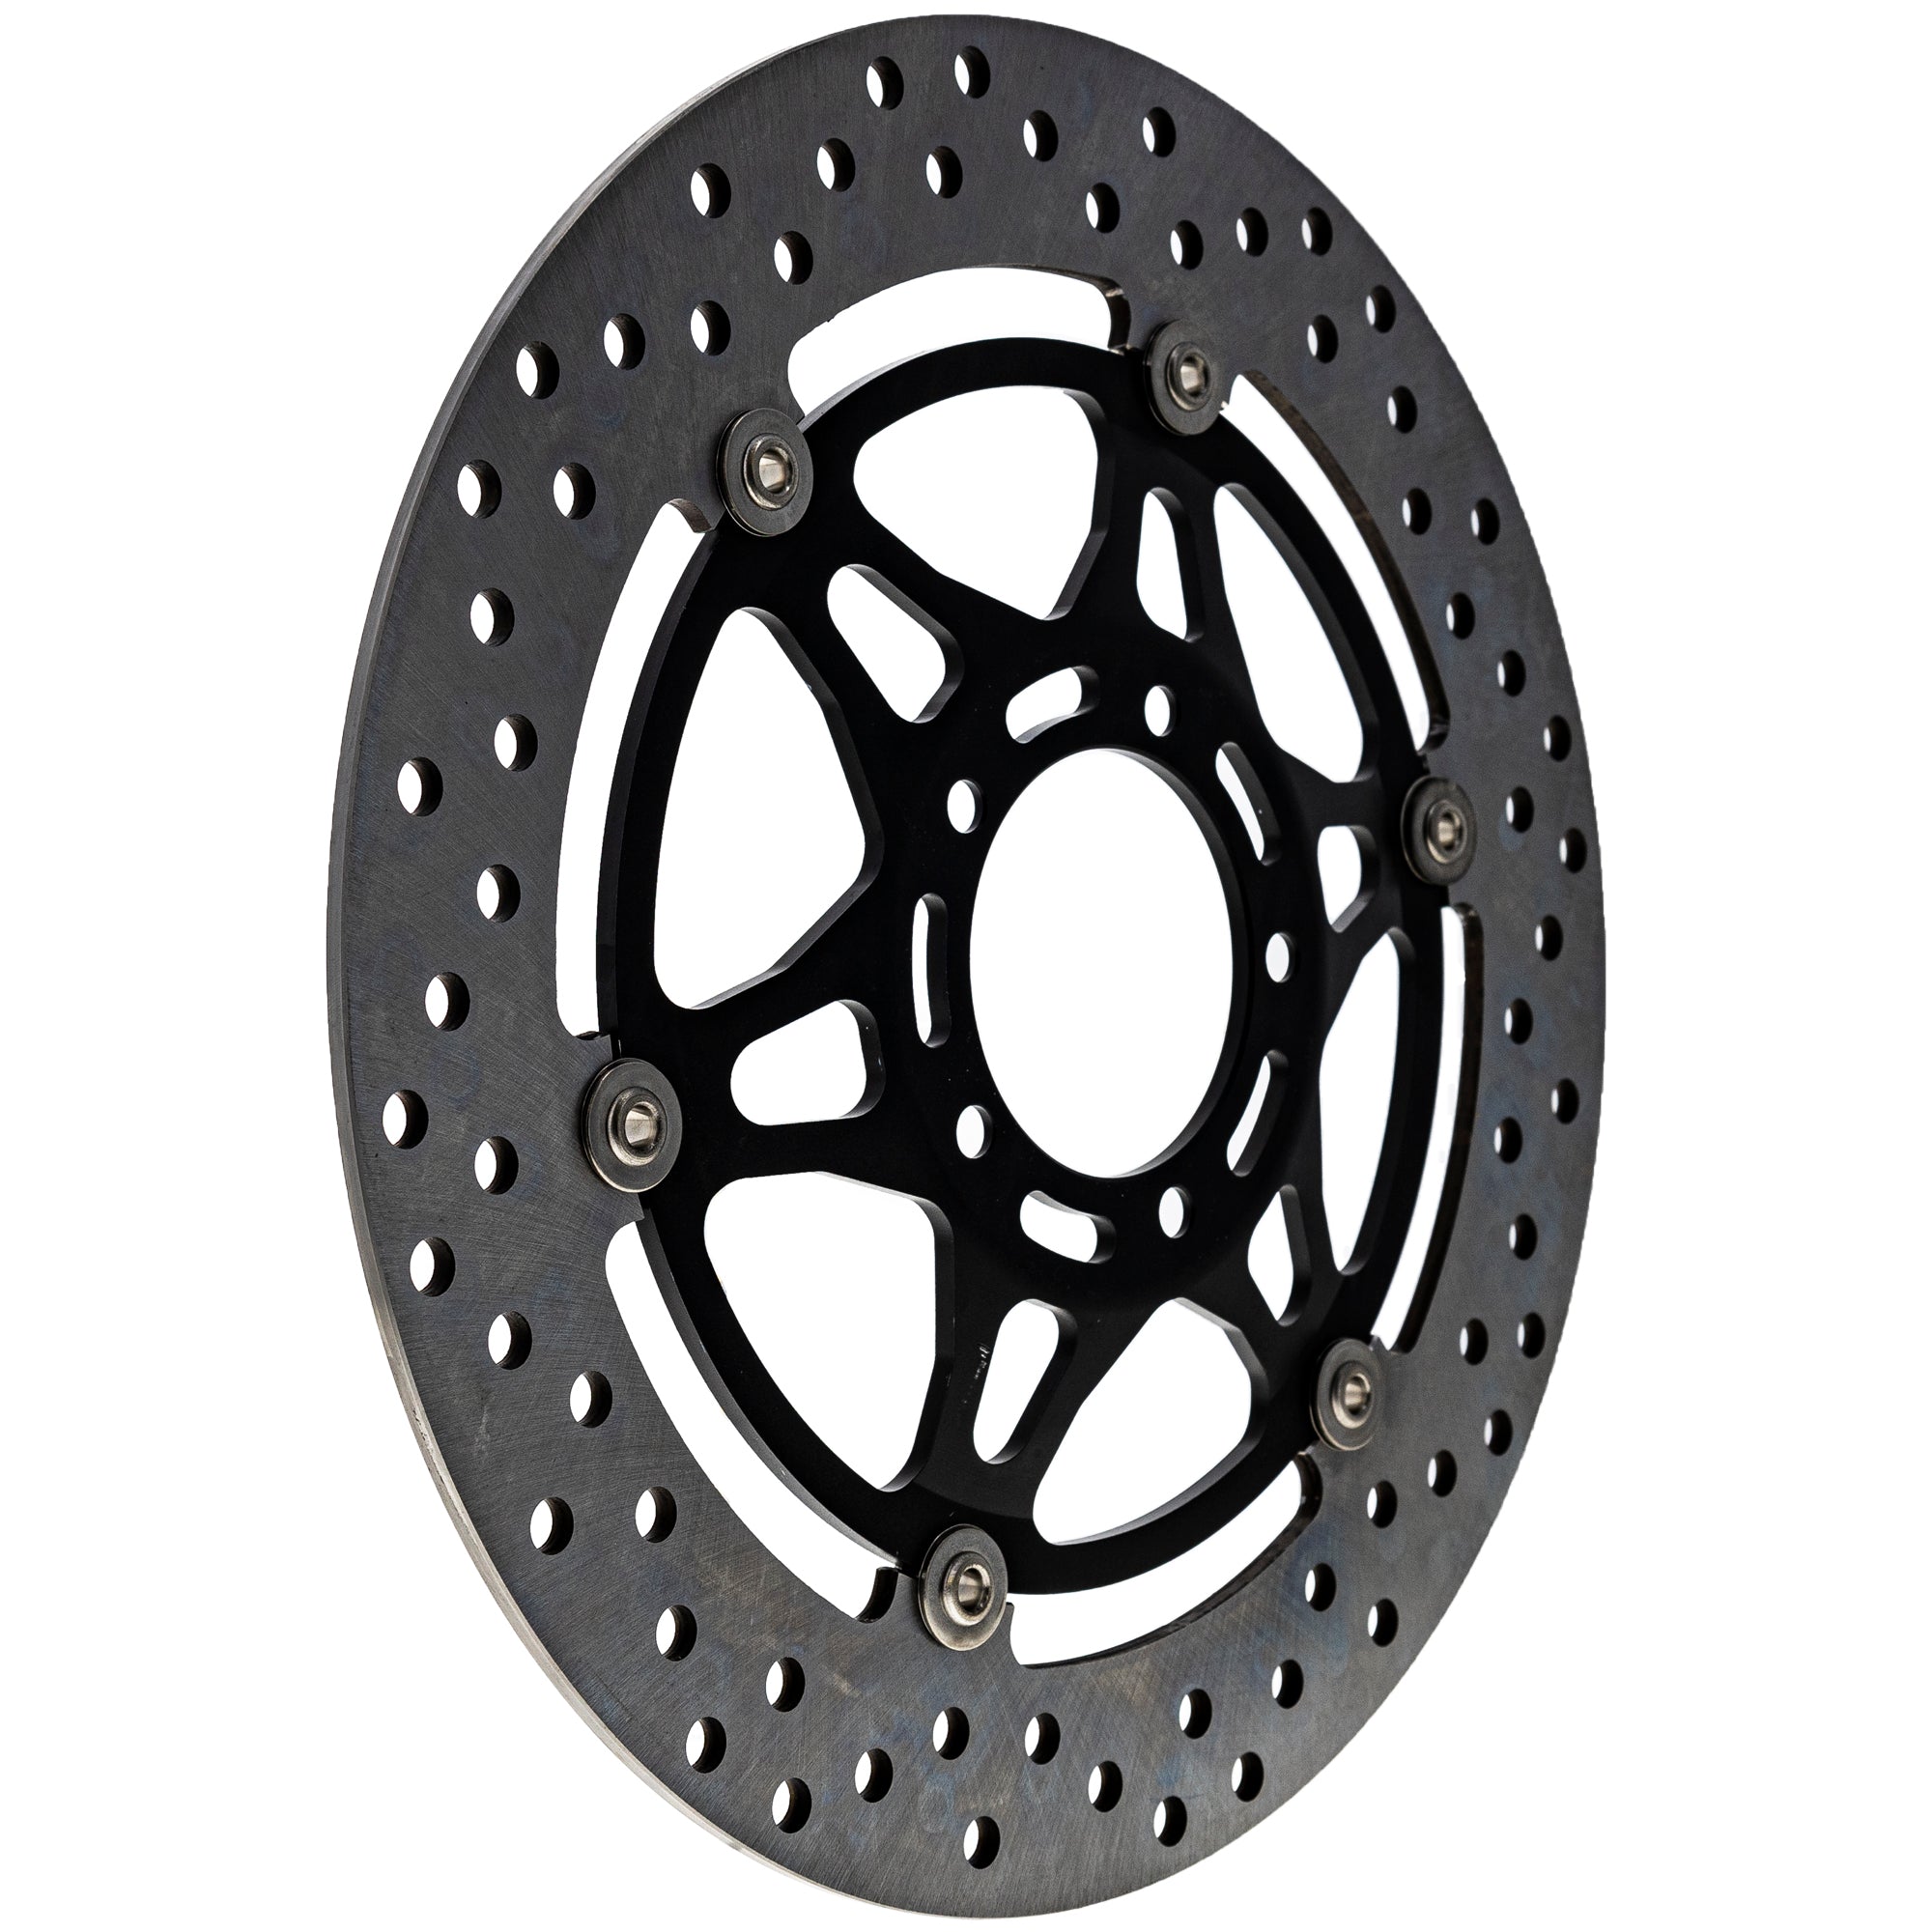 Brake Rotor 519-CRT2571R For Ducati 49240751A 49240551A 492.4.075.1A 492.4.055.1A